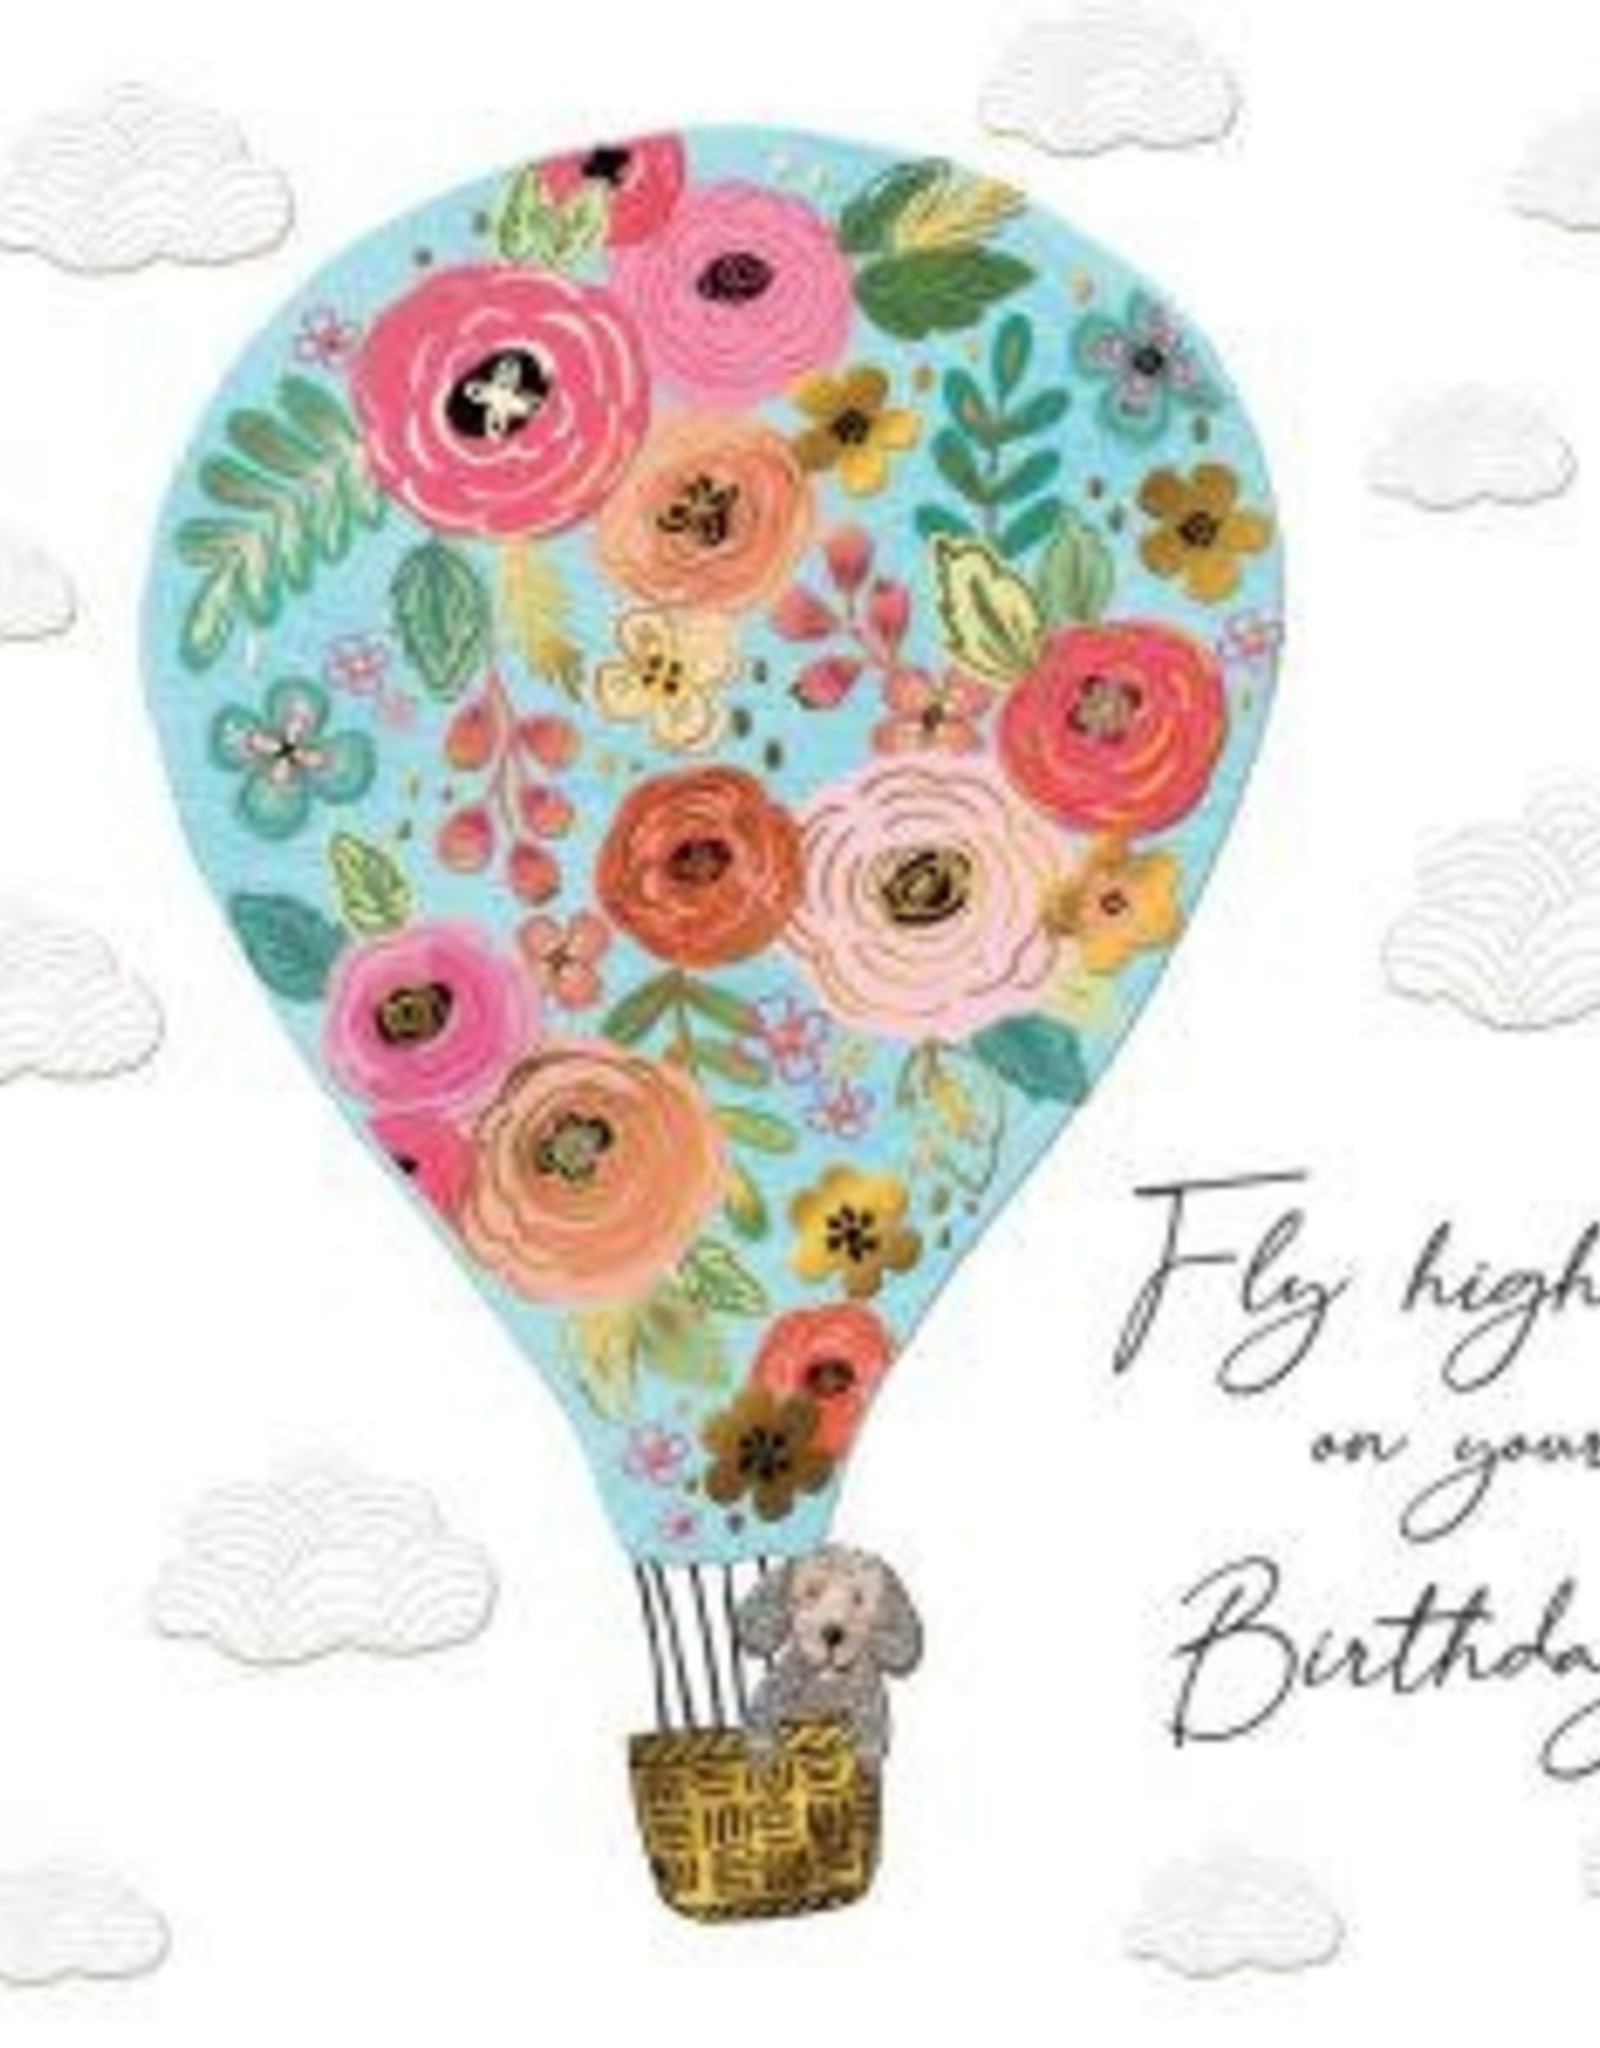 Incognito SUBLIME - FLY HIGH ON YOUR BIRTHDAY - HOT AIR BALLOON (6'' X 6'')